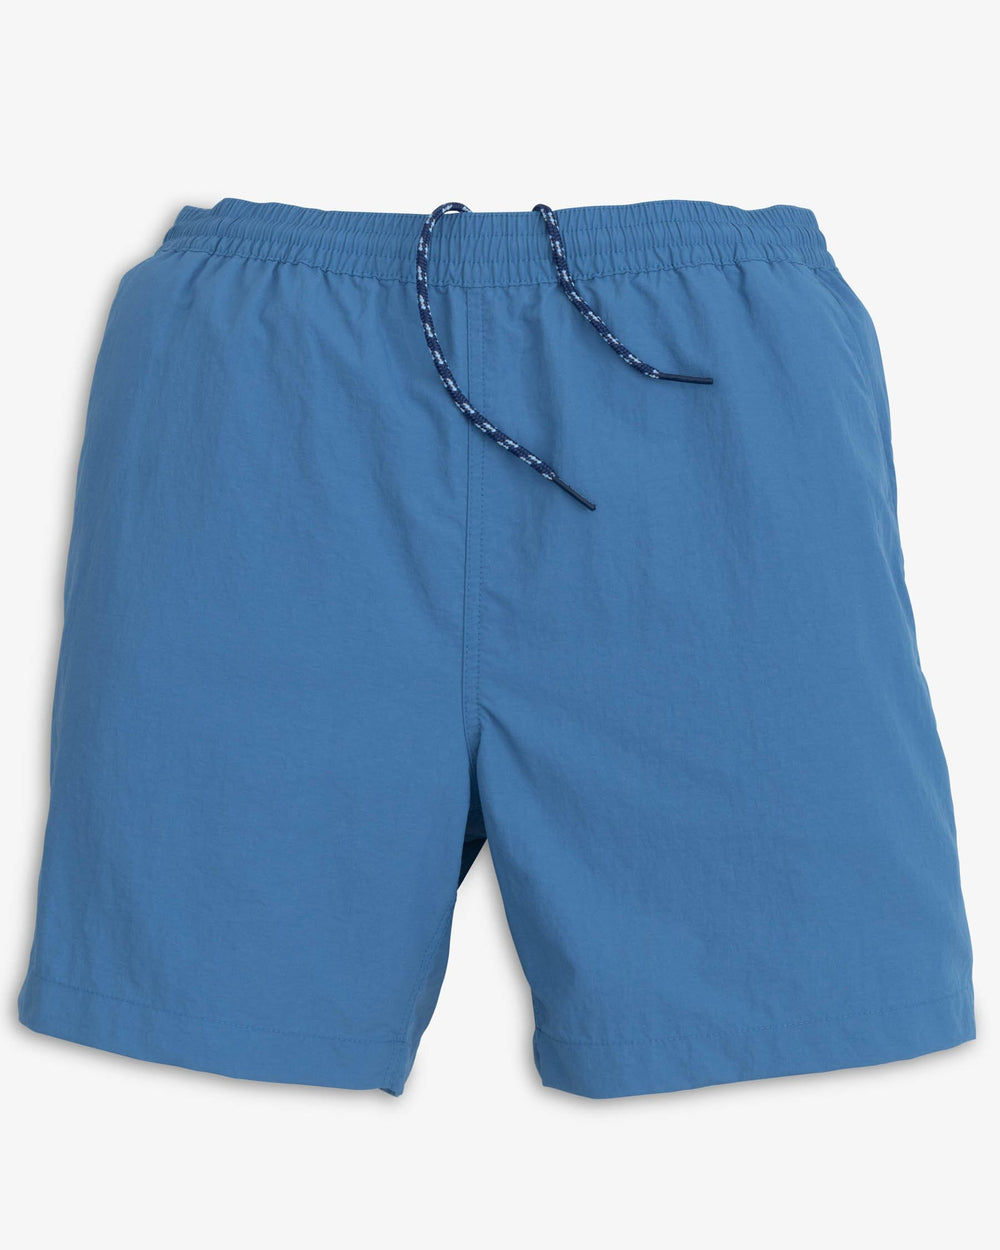 The front view of the Southern Tide Shoreline 6 Inch Short by Southern Tide - Atlantic Blue